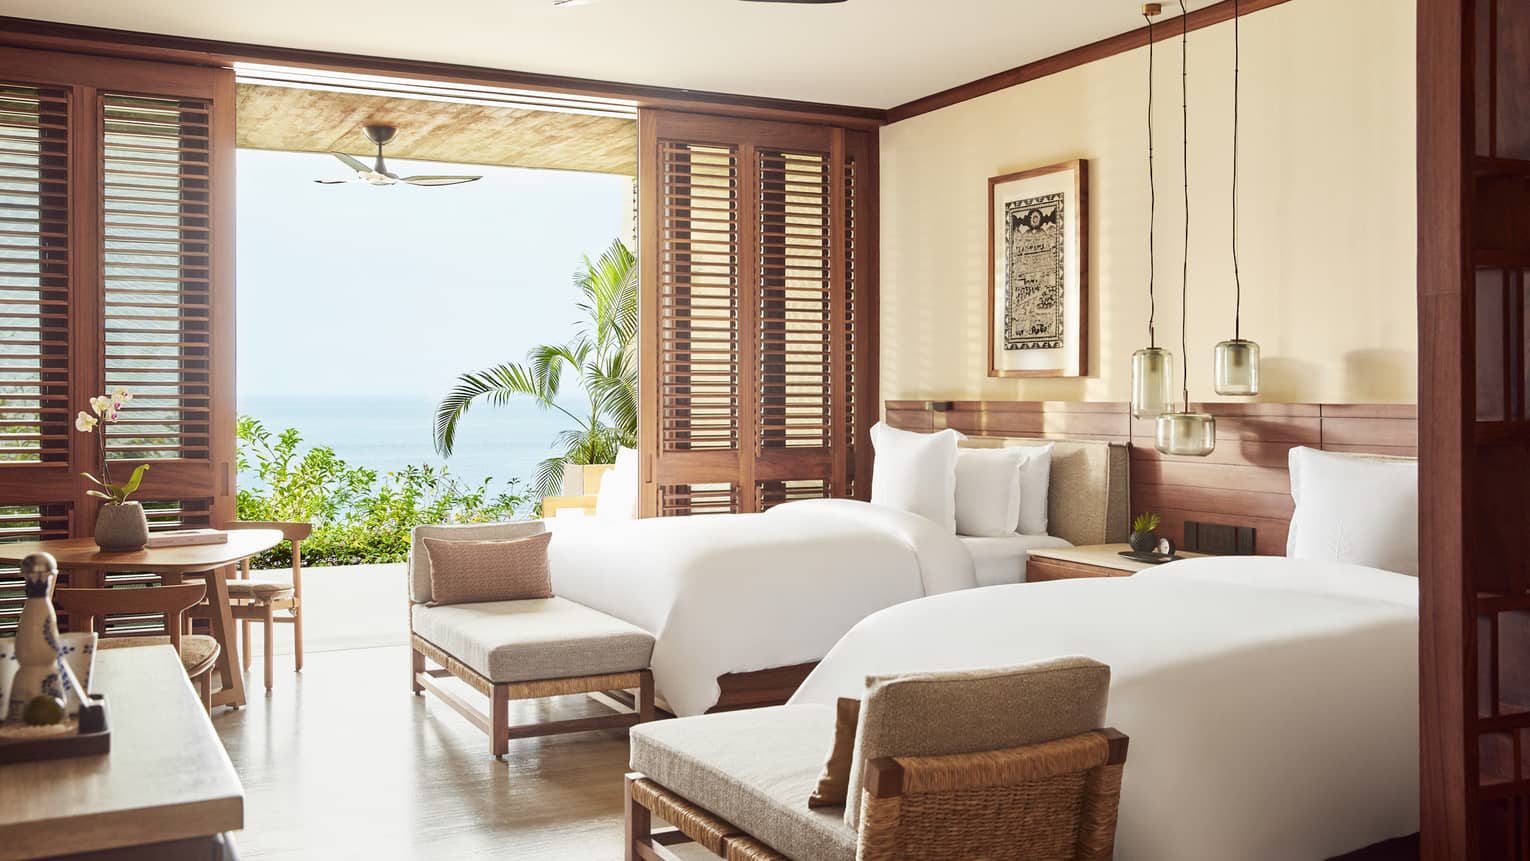 A beachfront room with 2 beds, a small table, benches at the end of each bed and a large open door to outside.